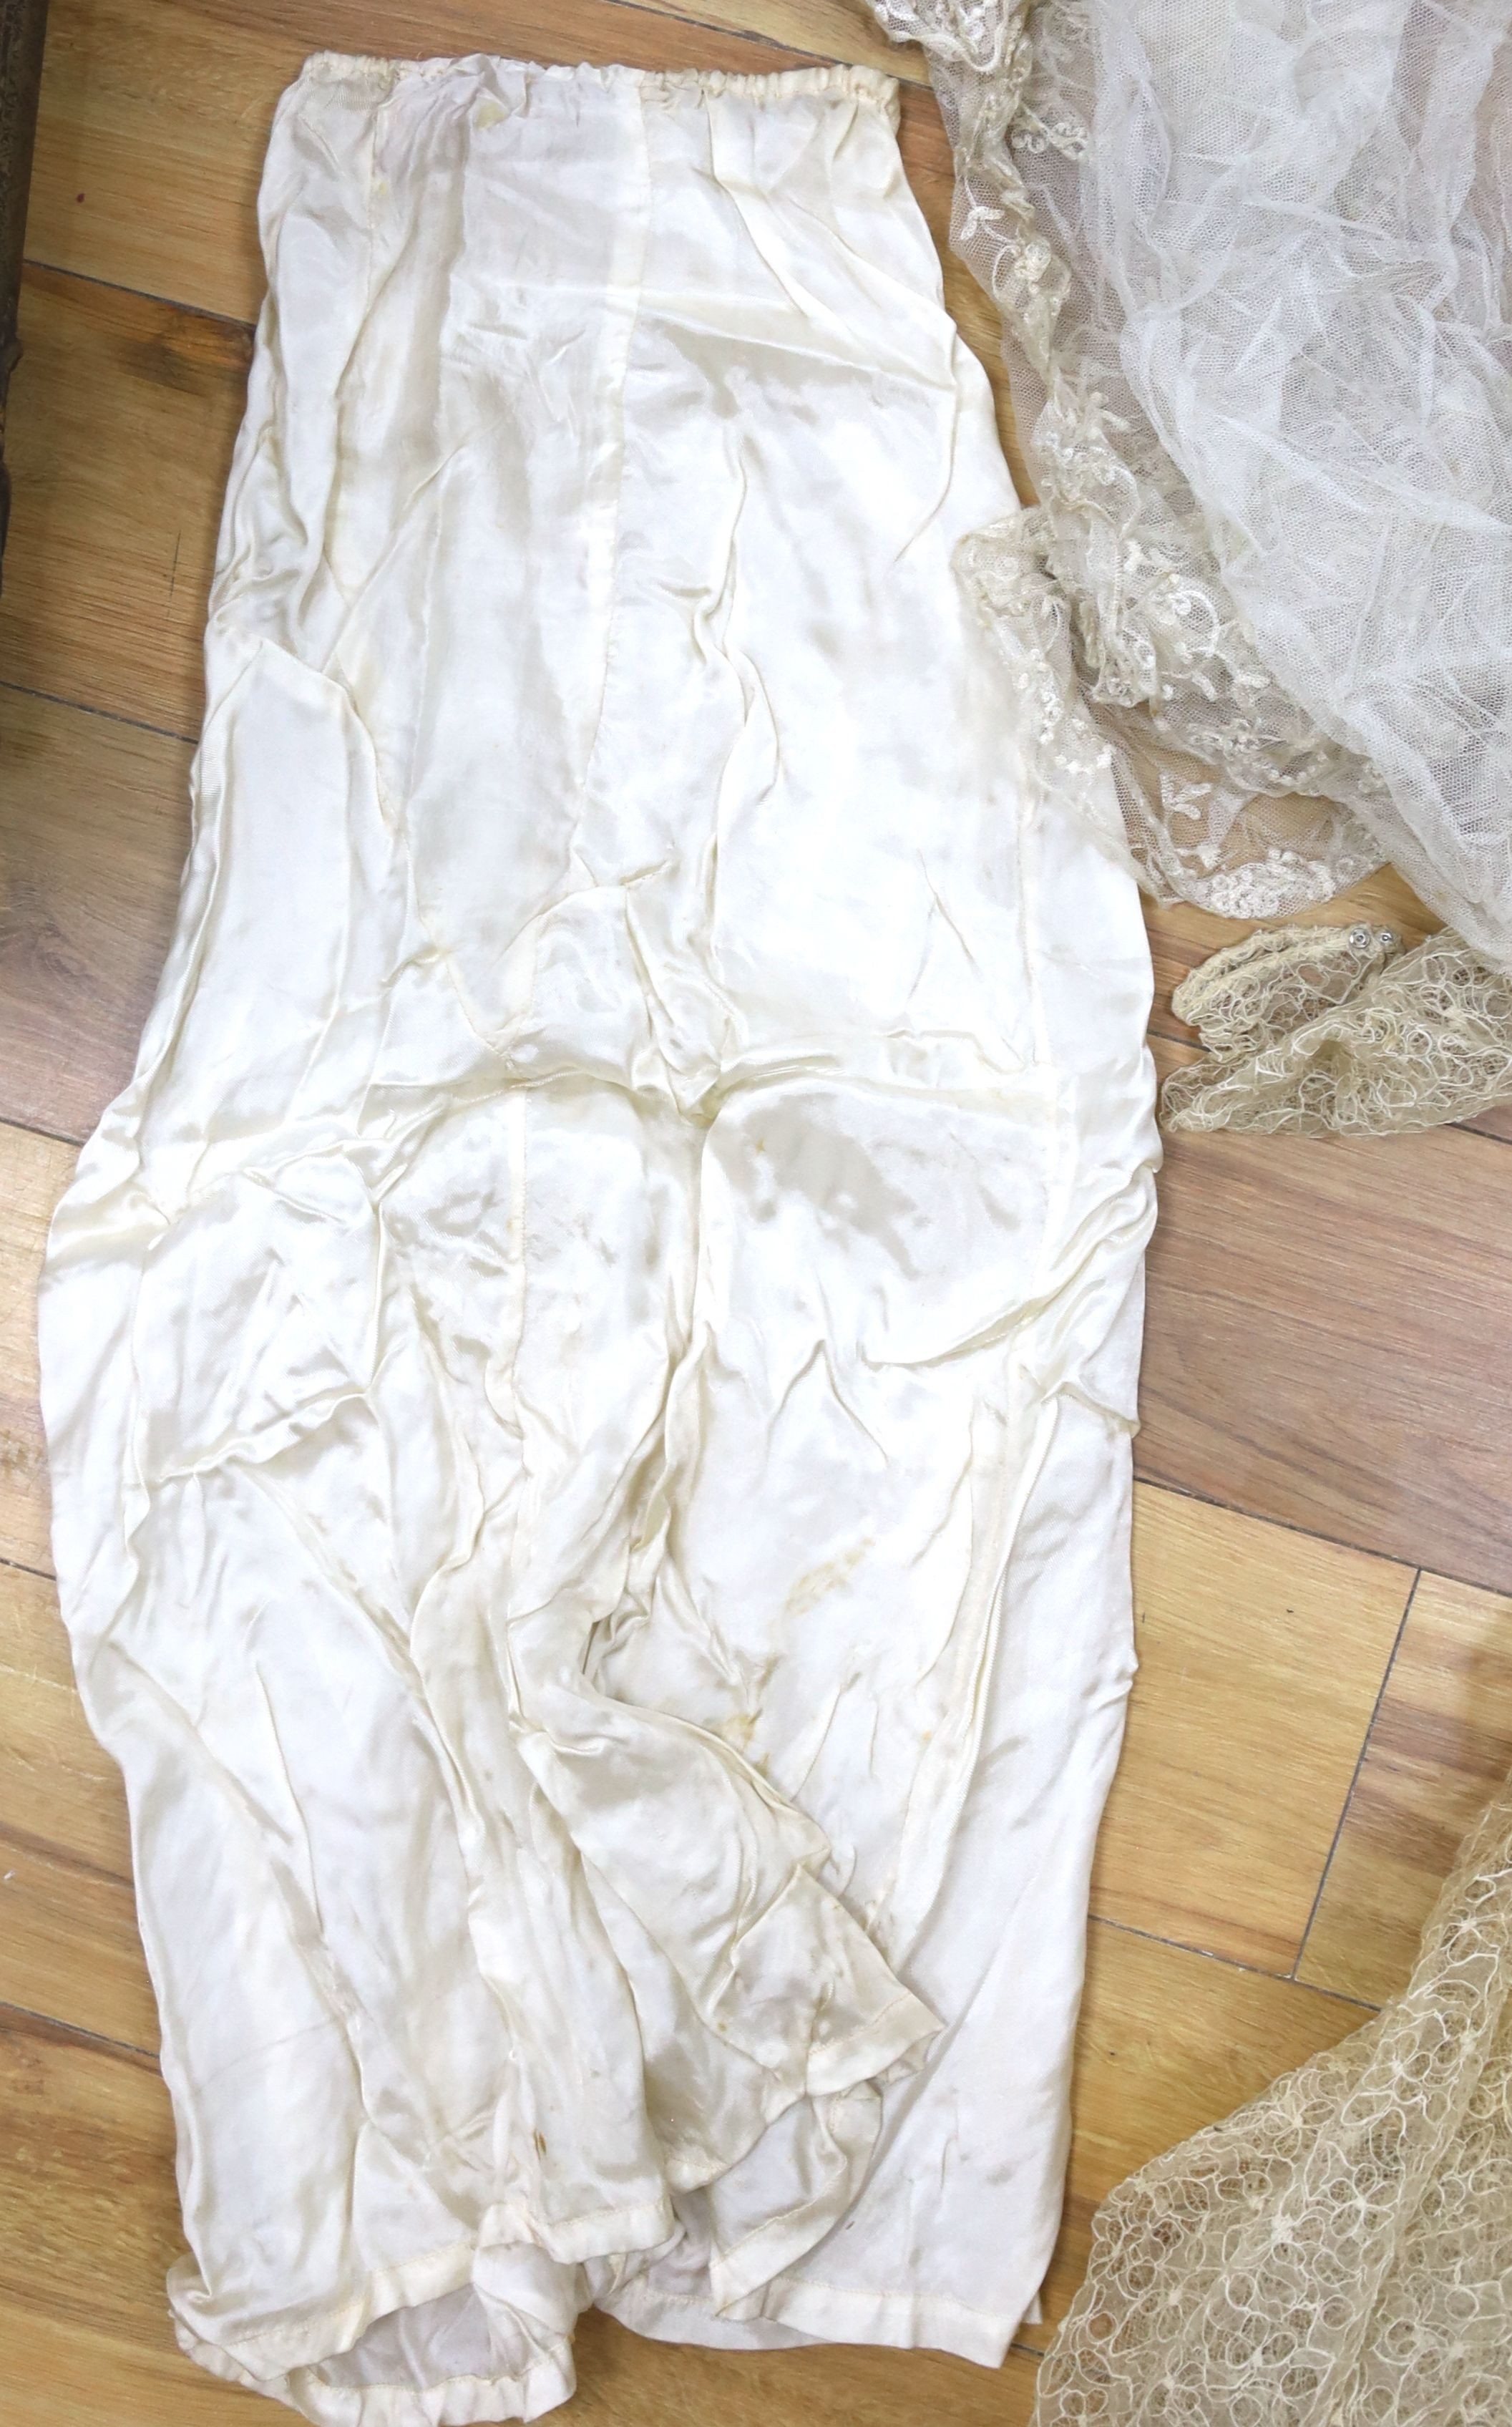 A 1930's lace and satin wedding dress including net veil